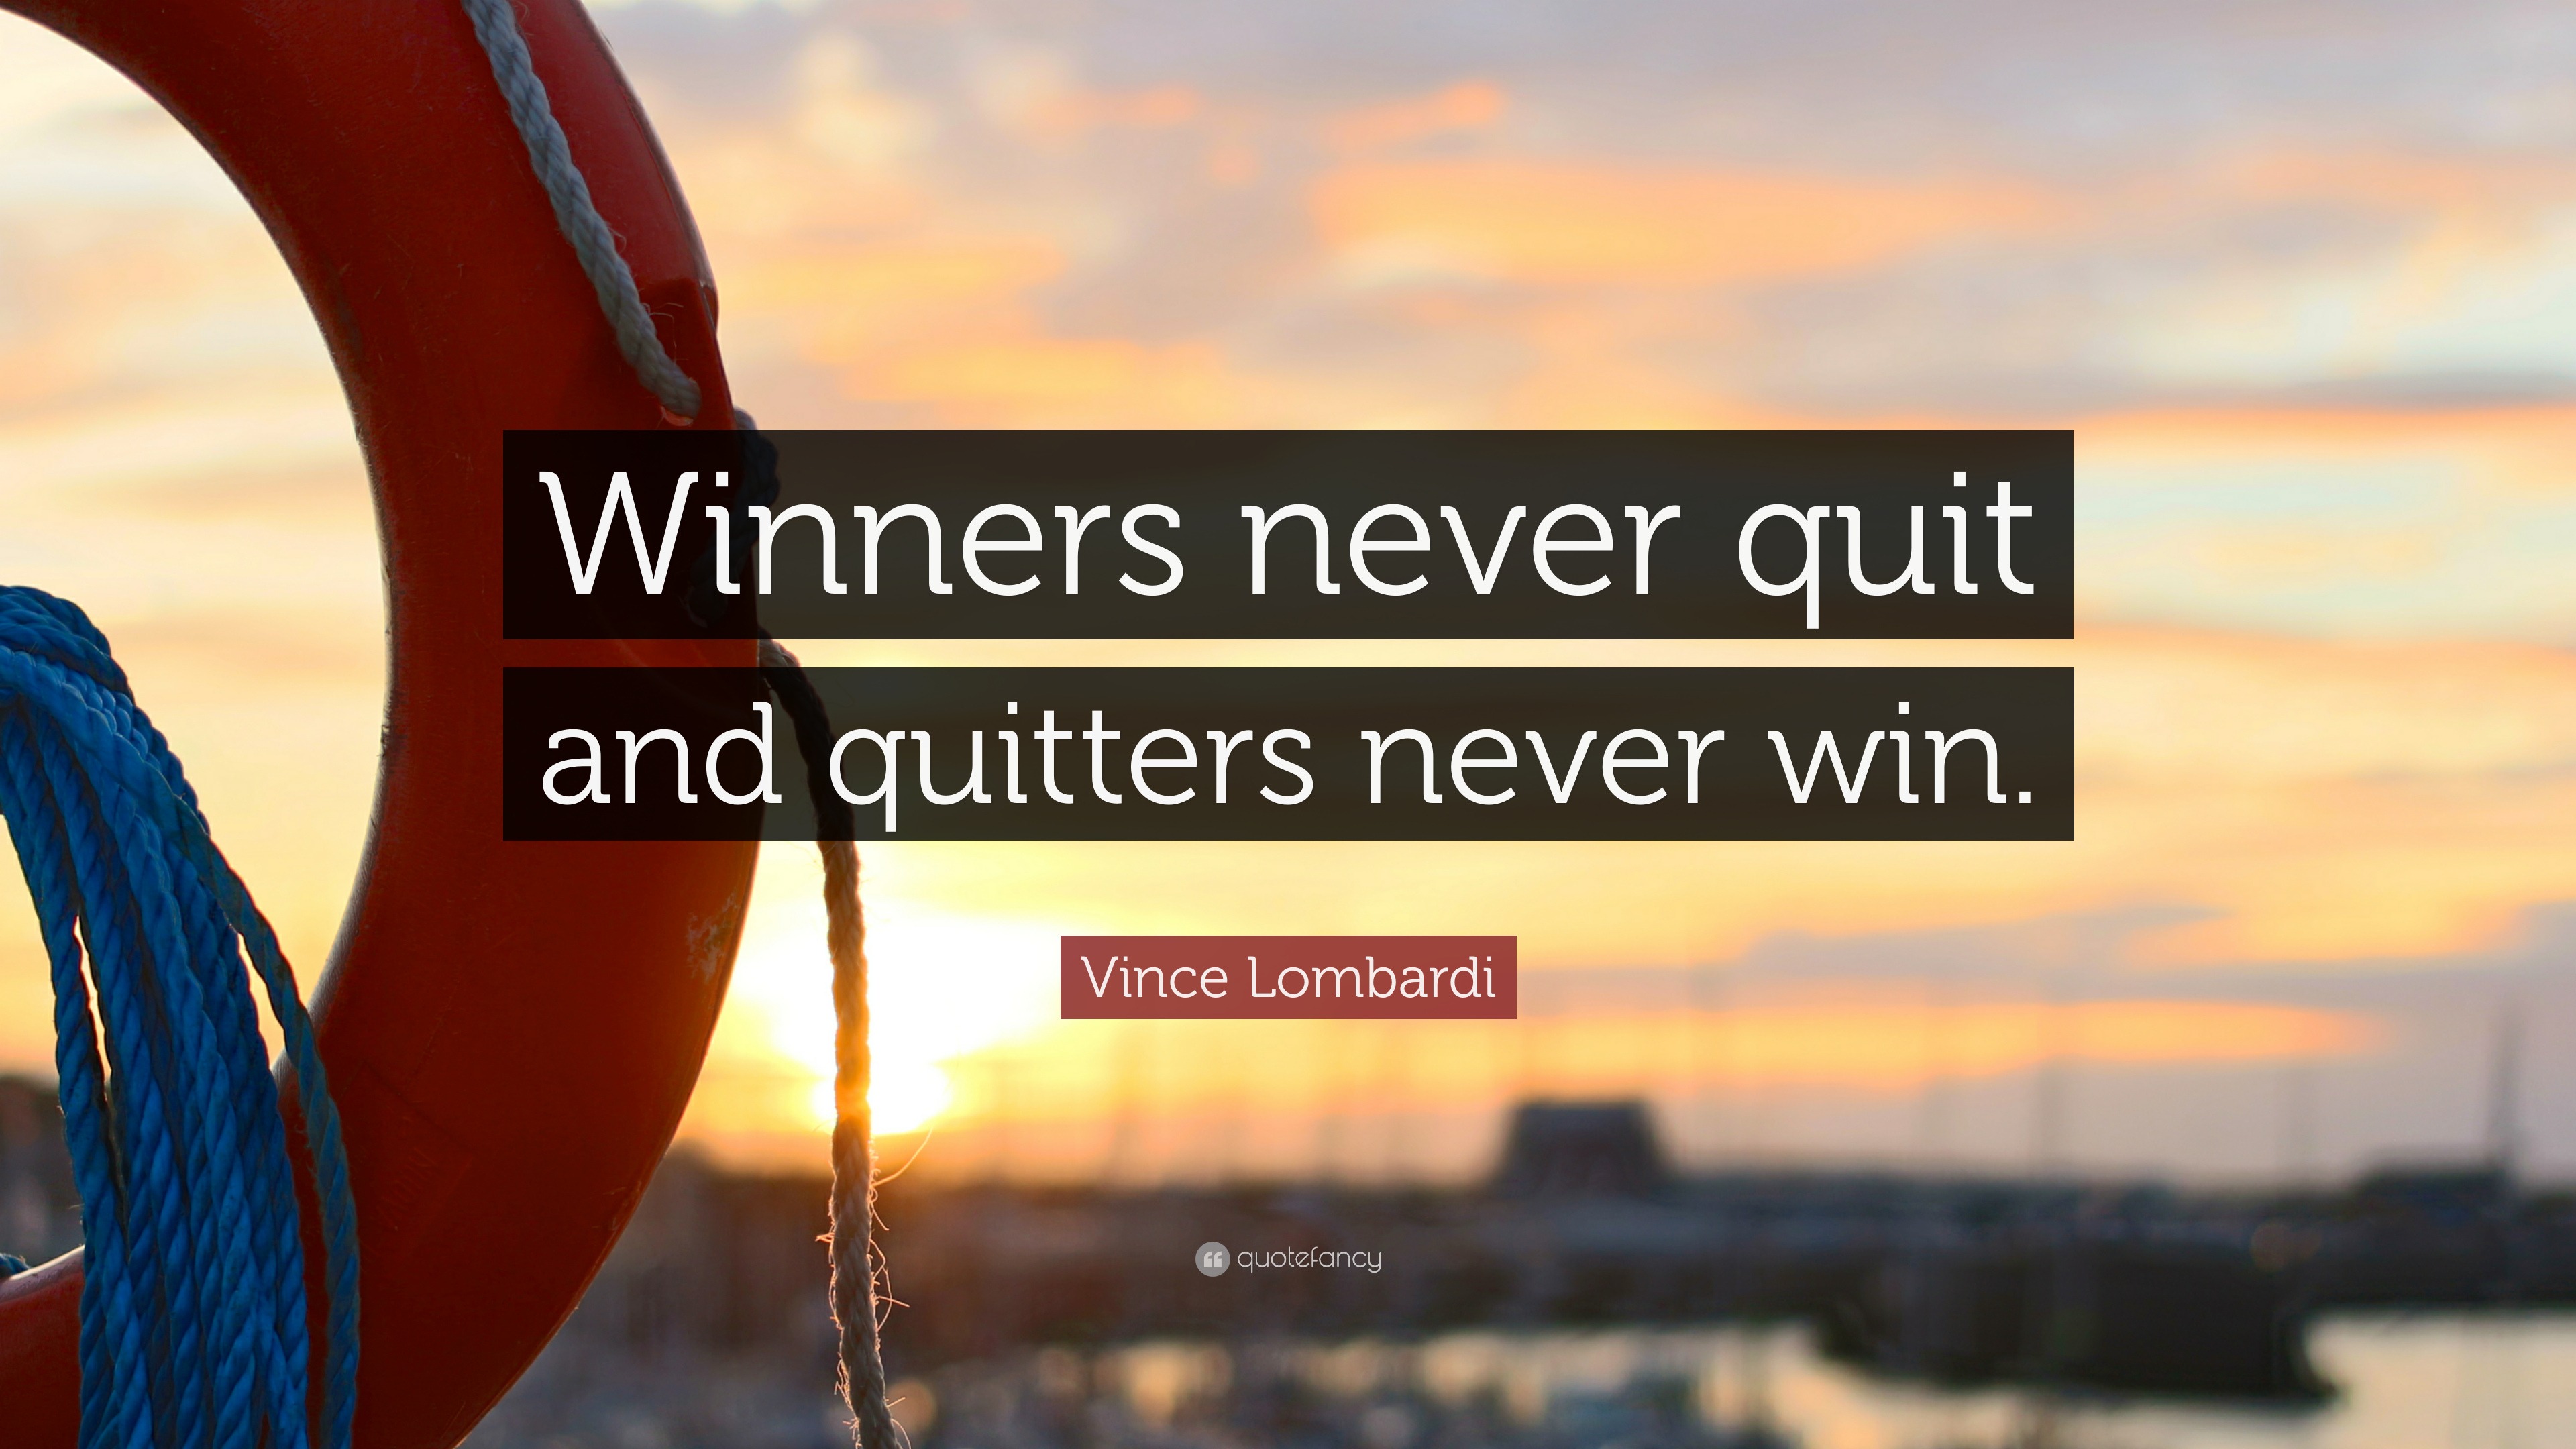 2002179 Vince Lombardi Quote Winners never quit and quitters never win